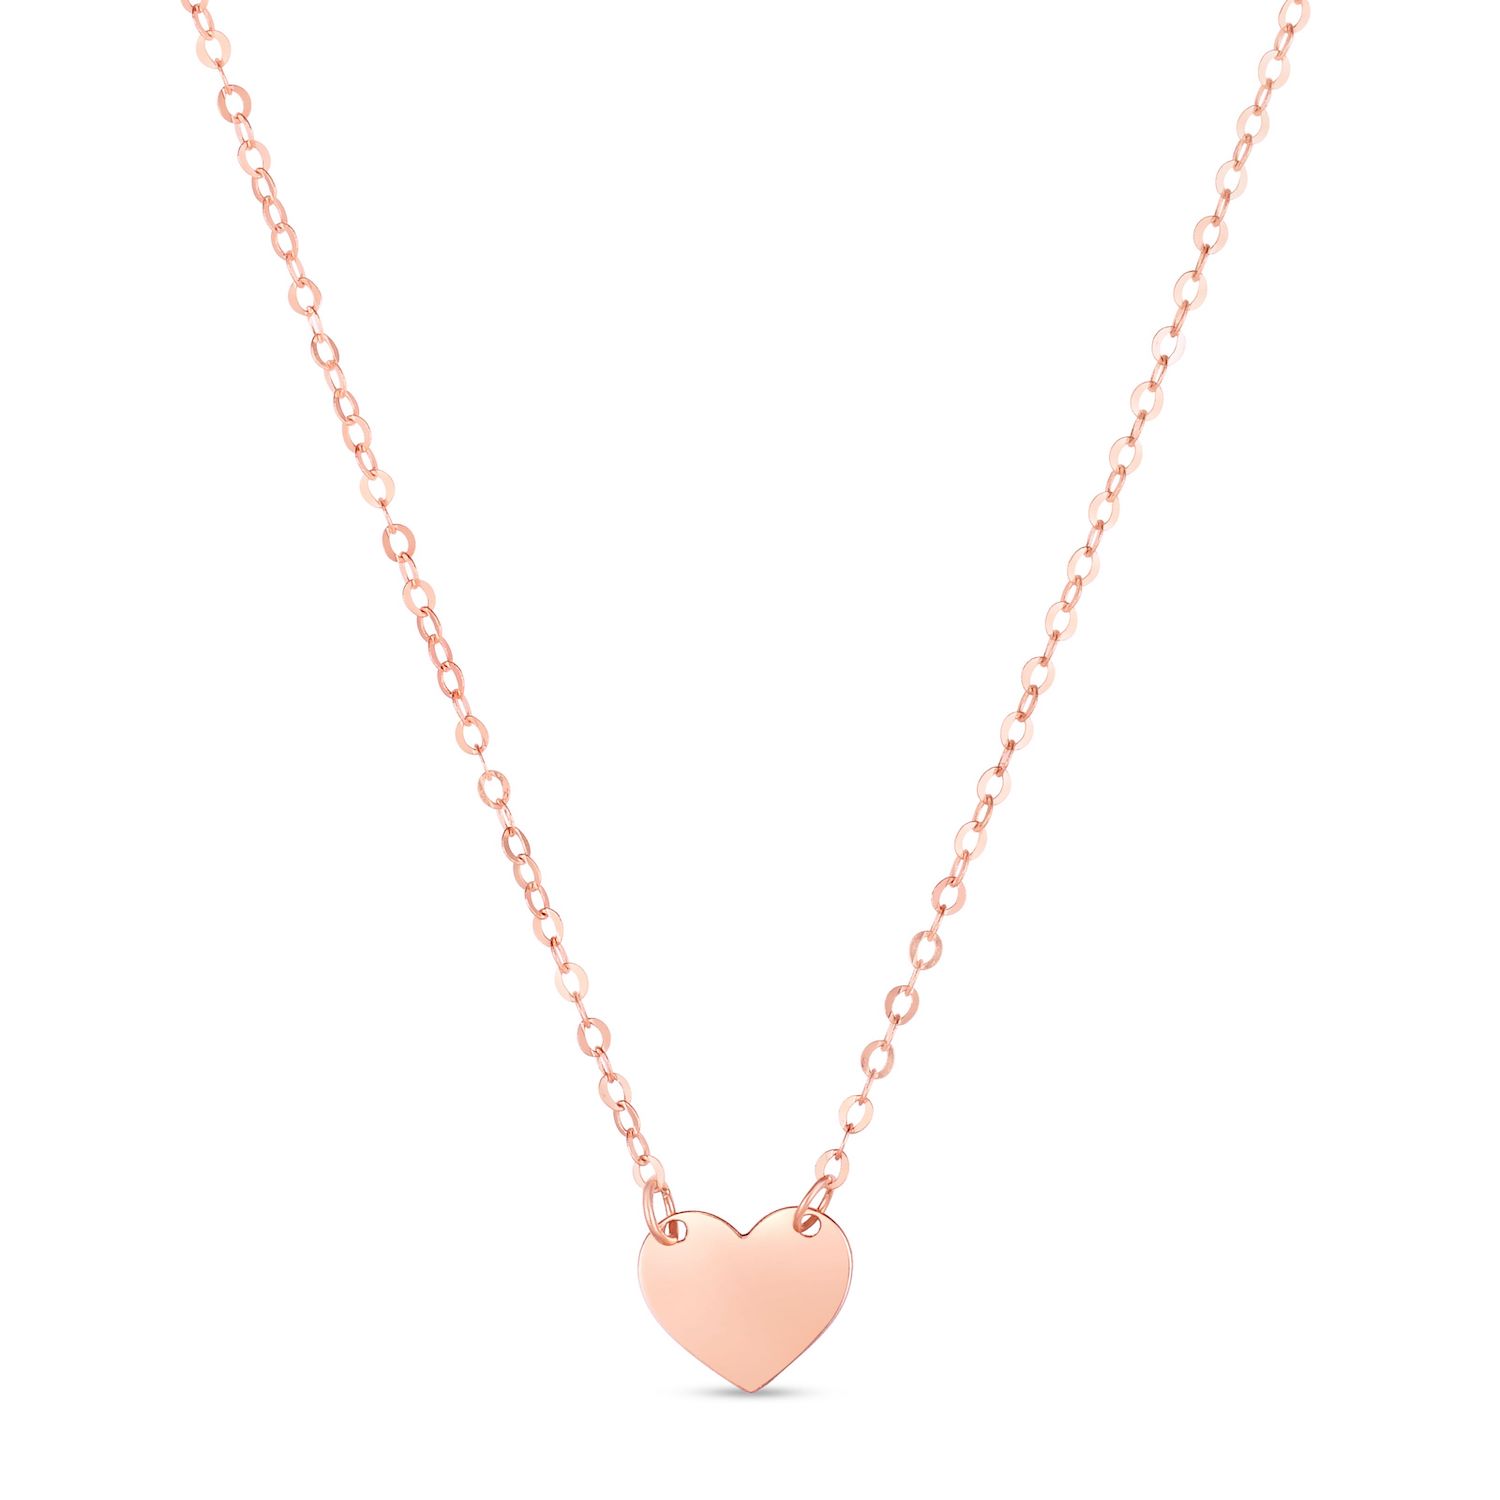 Engravable 14K Gold Heart Pendant Cable Chain Necklace 16"-18" Adjustable - Rose Gold